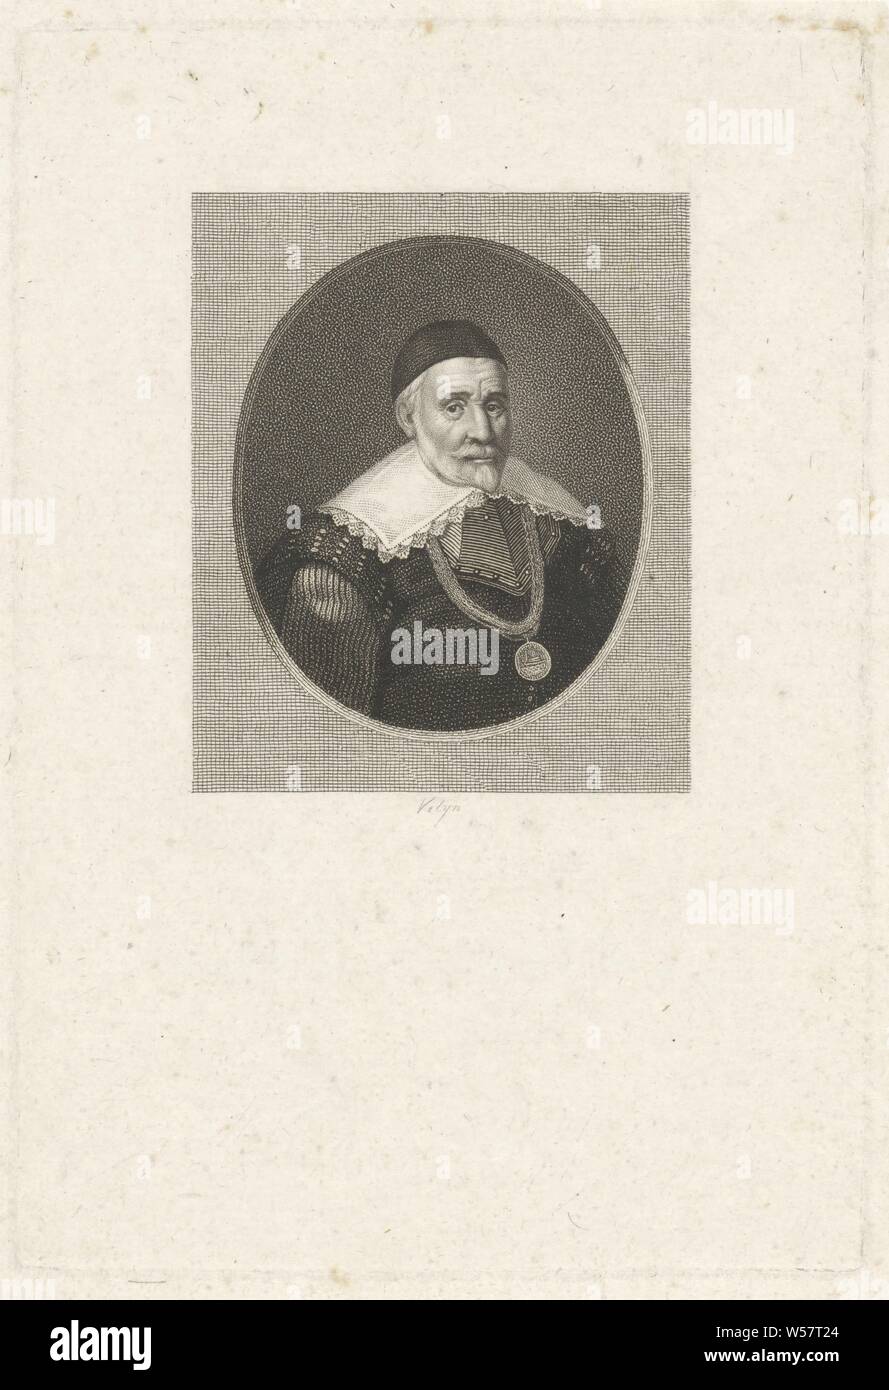 Portrait of Adriaen Joosten van Bergen, one of the peat skippers in Breda. On 4 March 1590, Van Bergen brought 72 State soldiers into the city of Breda with his cargo of peat for the Spanish occupiers. They recaptured the fortress from the Spaniards and brought the city and castle back into the hands of Prince Maurits, Breda, Adriaen Joosten van Bergen, Philippus Velijn (mentioned on object), Netherlands, 1797 - 1836, paper, etching, h 151 mm × w 102 mm Stock Photo